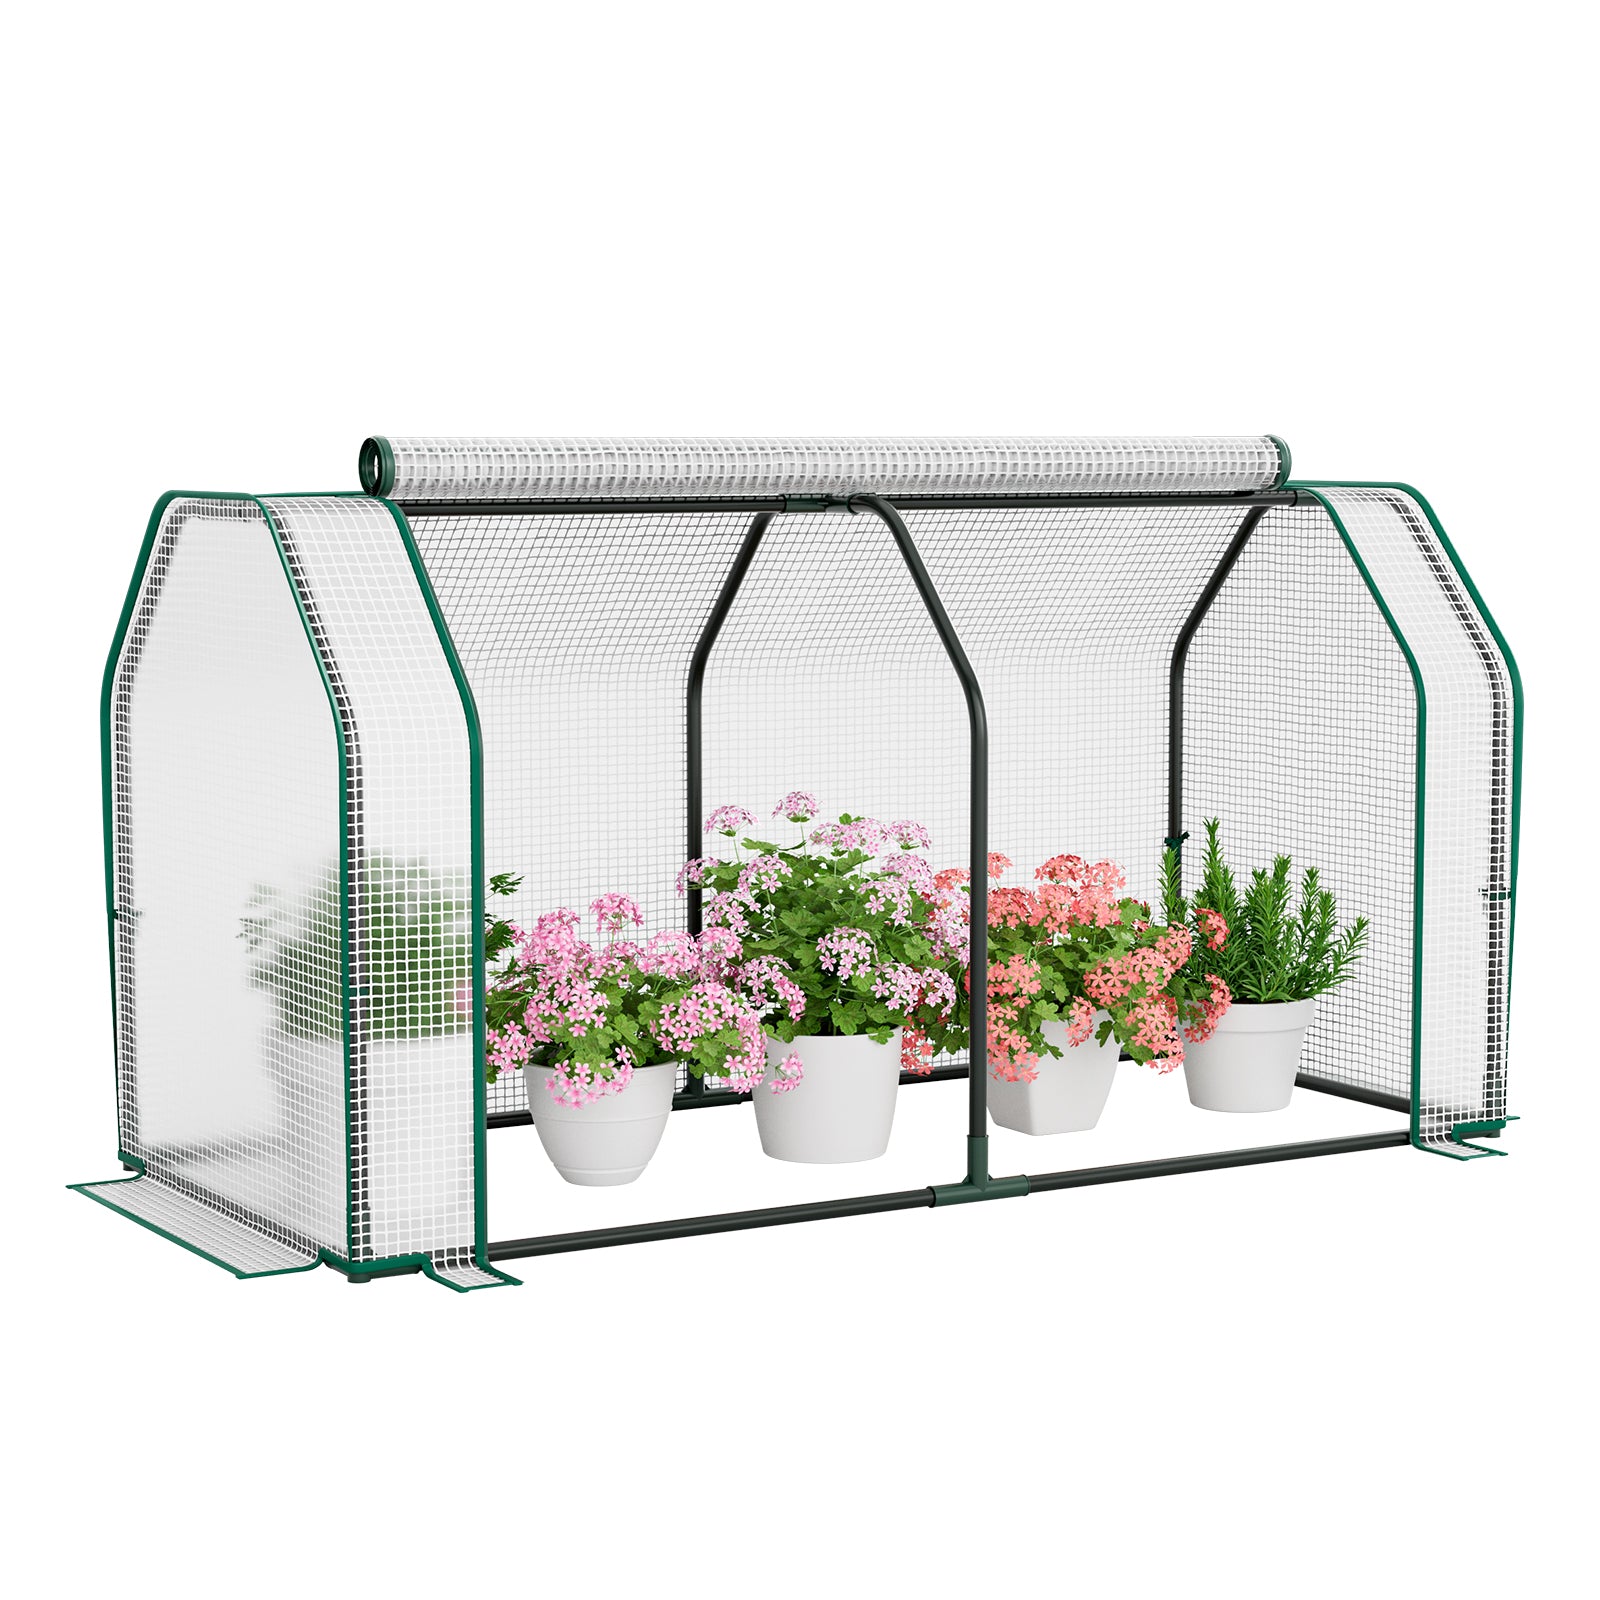 47.5 x 21.5 x 24 Inch Mini Greenhouse with Roll-up Zipper Door, White - Gallery Canada